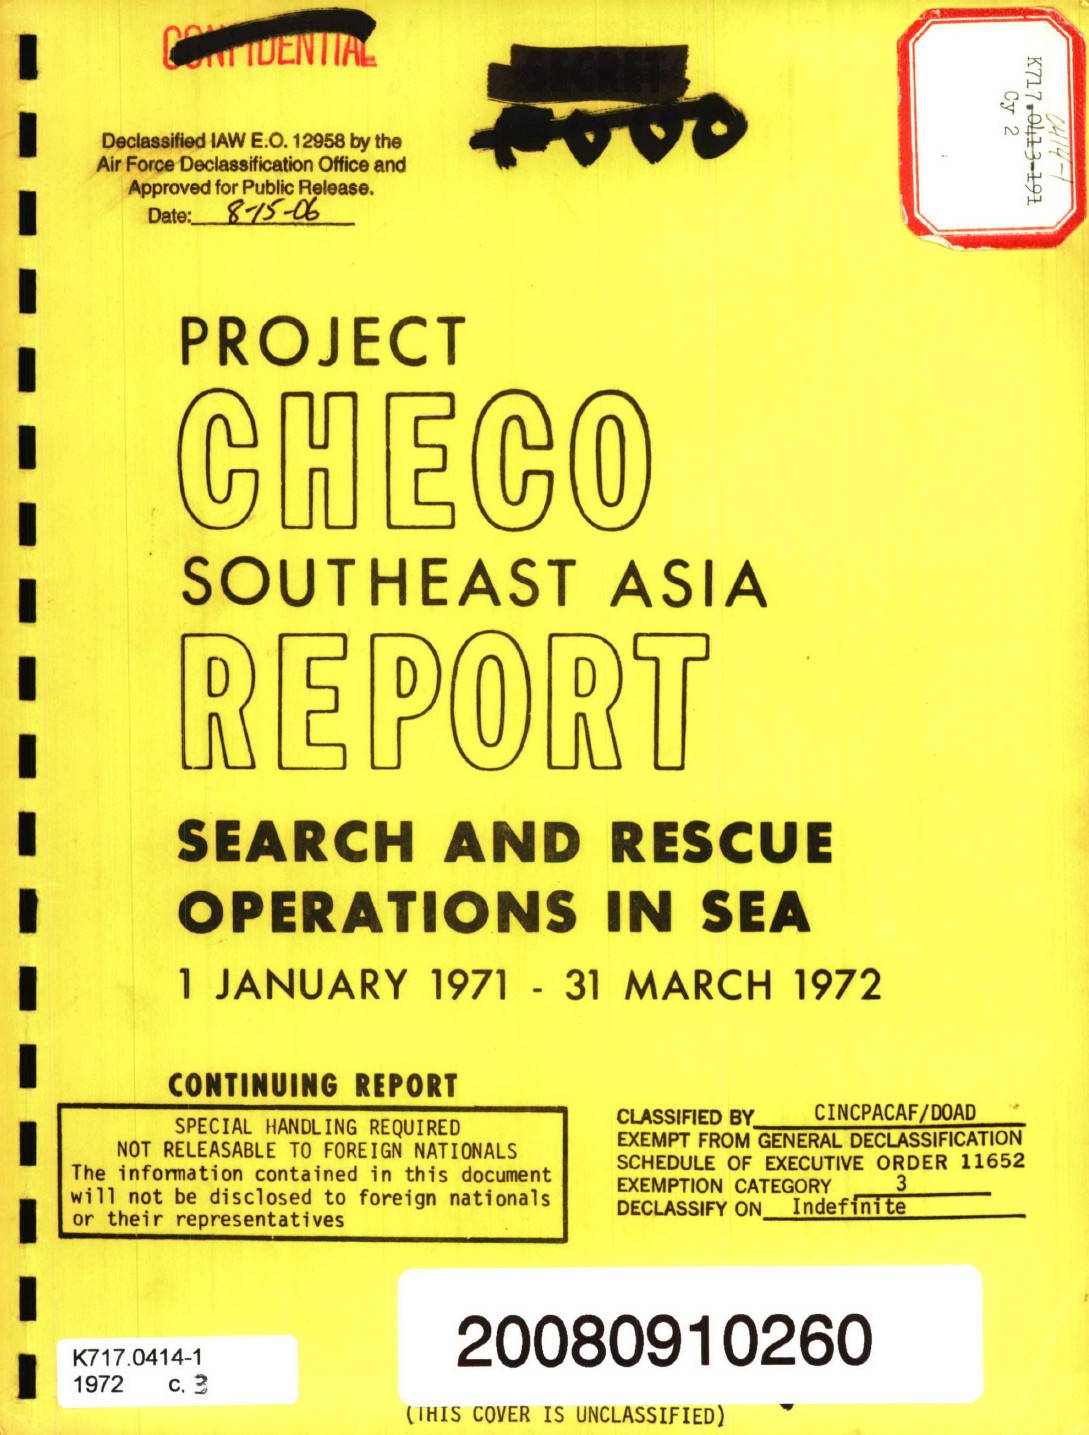 Page-from-Project-CHECO-Southeast-Asia-Report-Search-and-Rescue-Operations-in-SEA-1-January-1971-31-March-1972